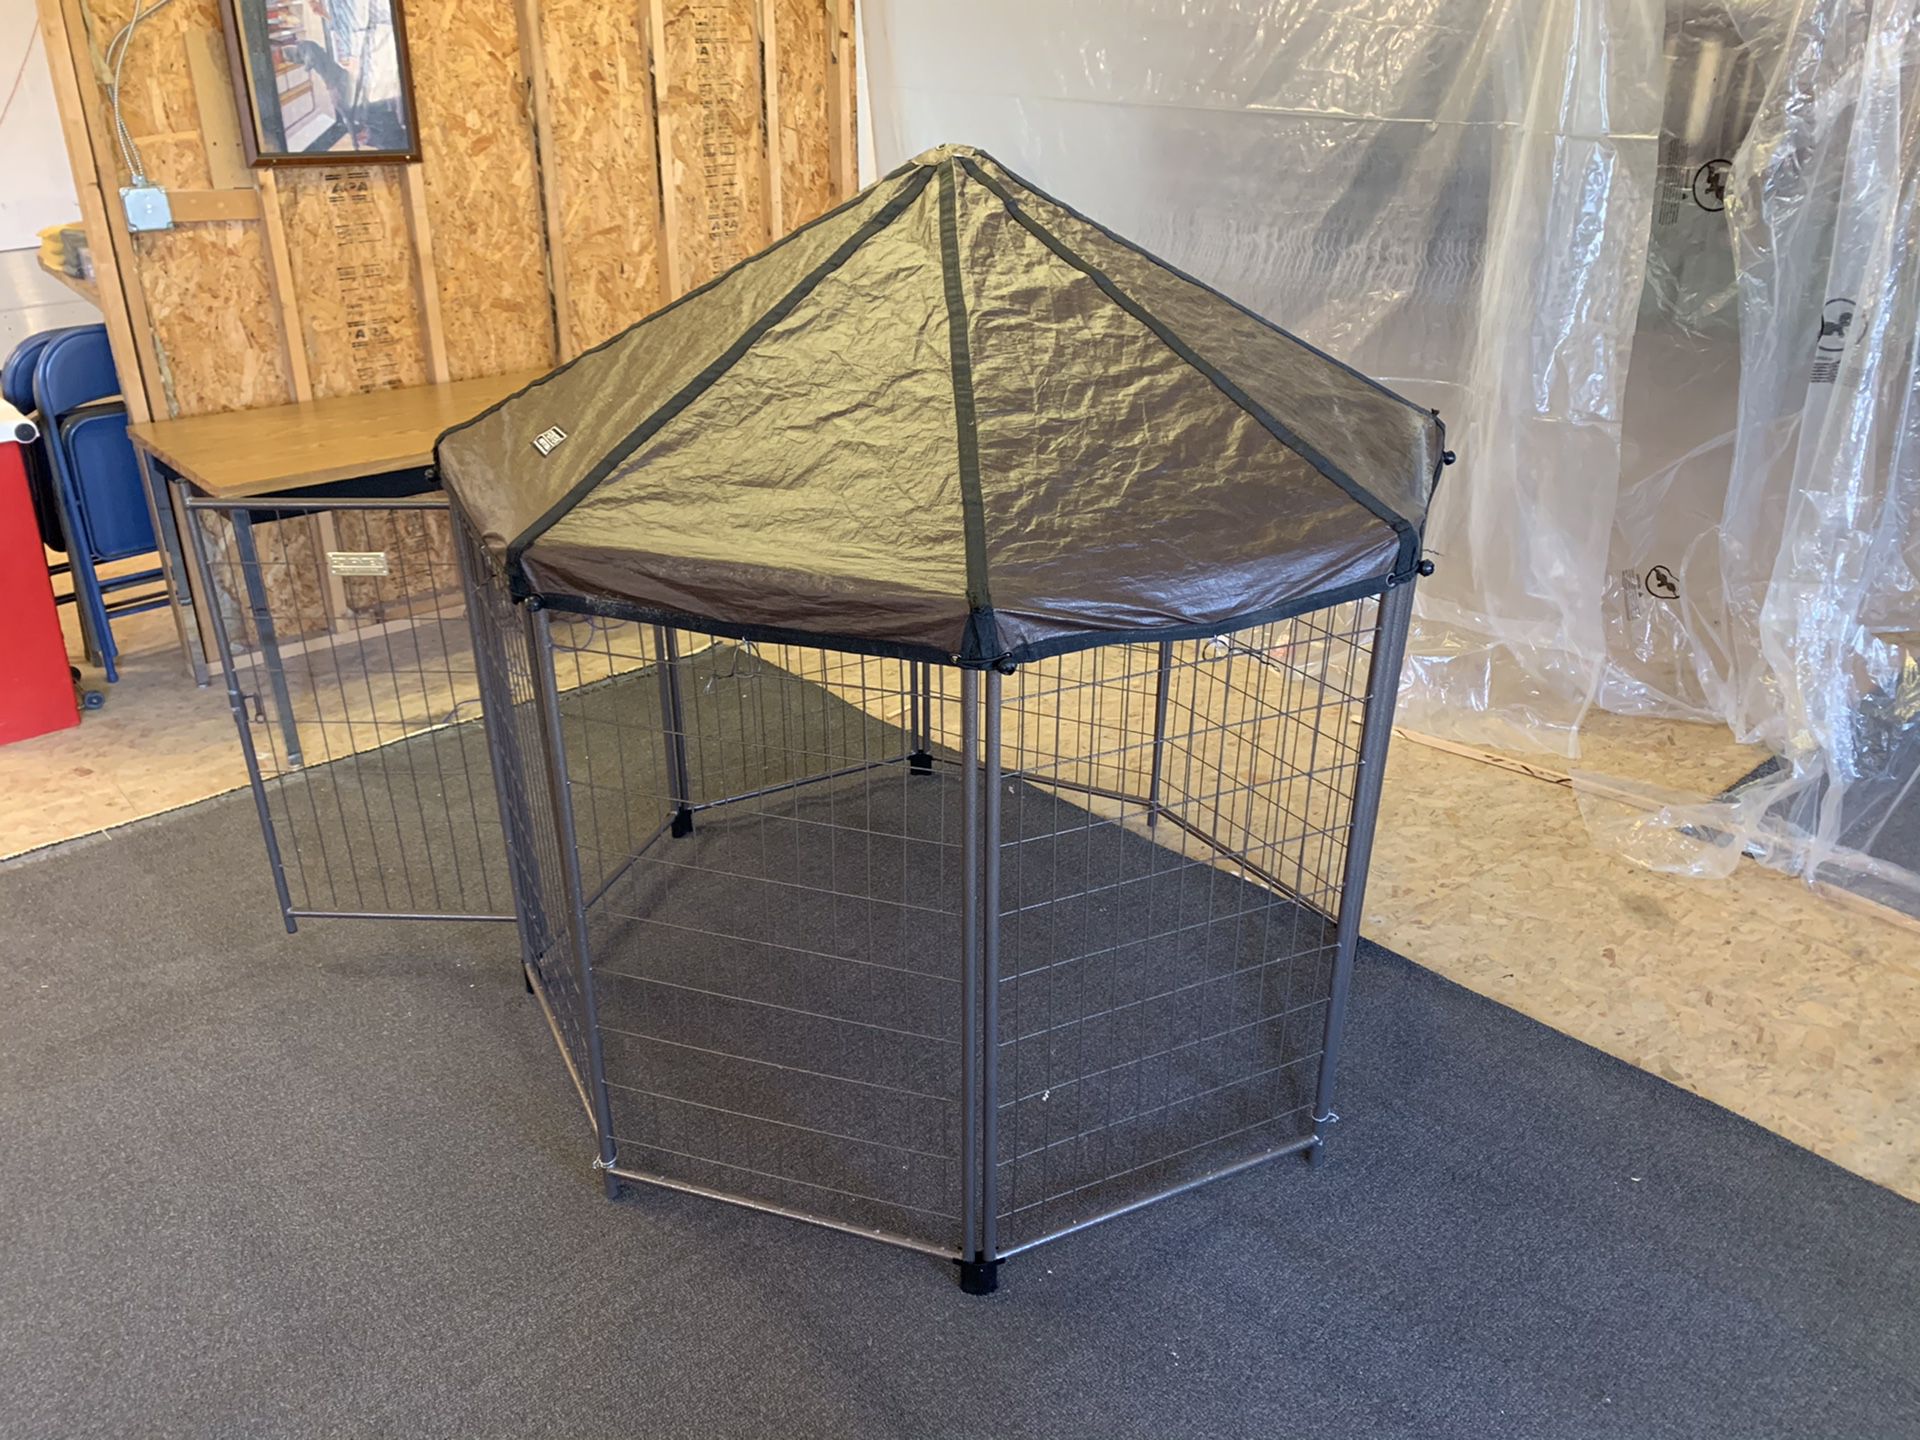 Kennel for cat or dog. Brand new and never used. Brand new is $129 on amazon. Asking $85.00